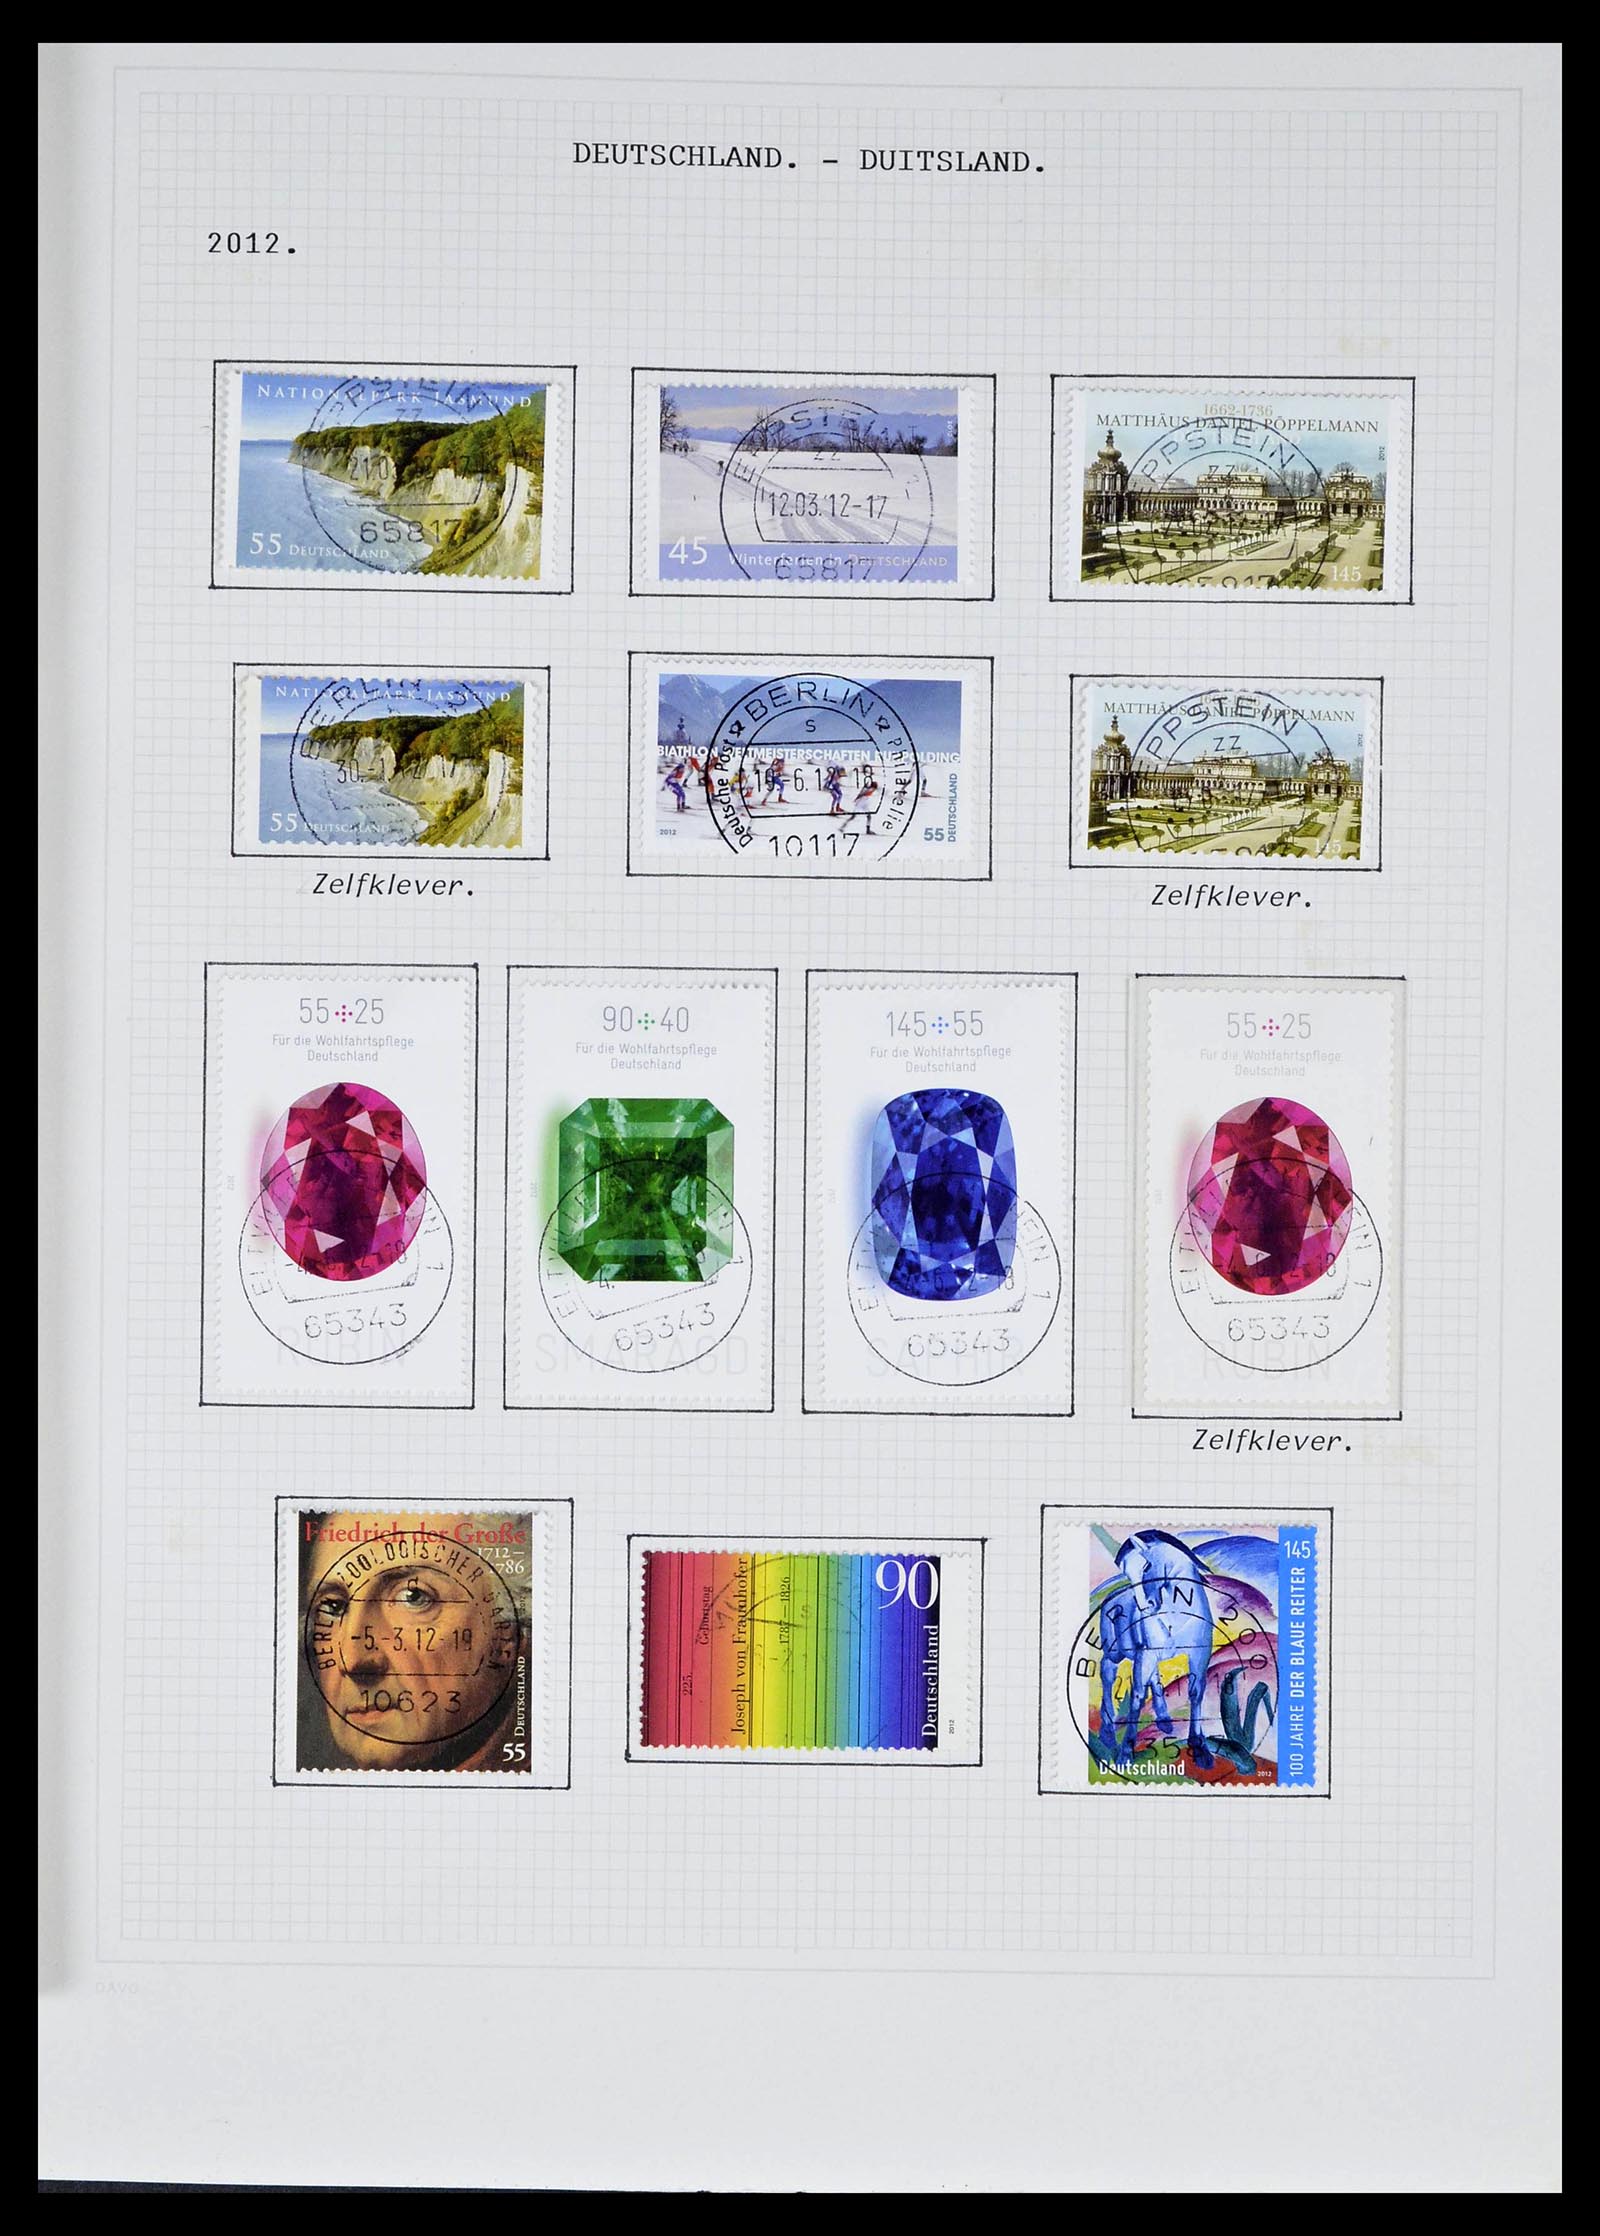 39324 0206 - Stamp collection 39324 Bundespost 1986-2012.